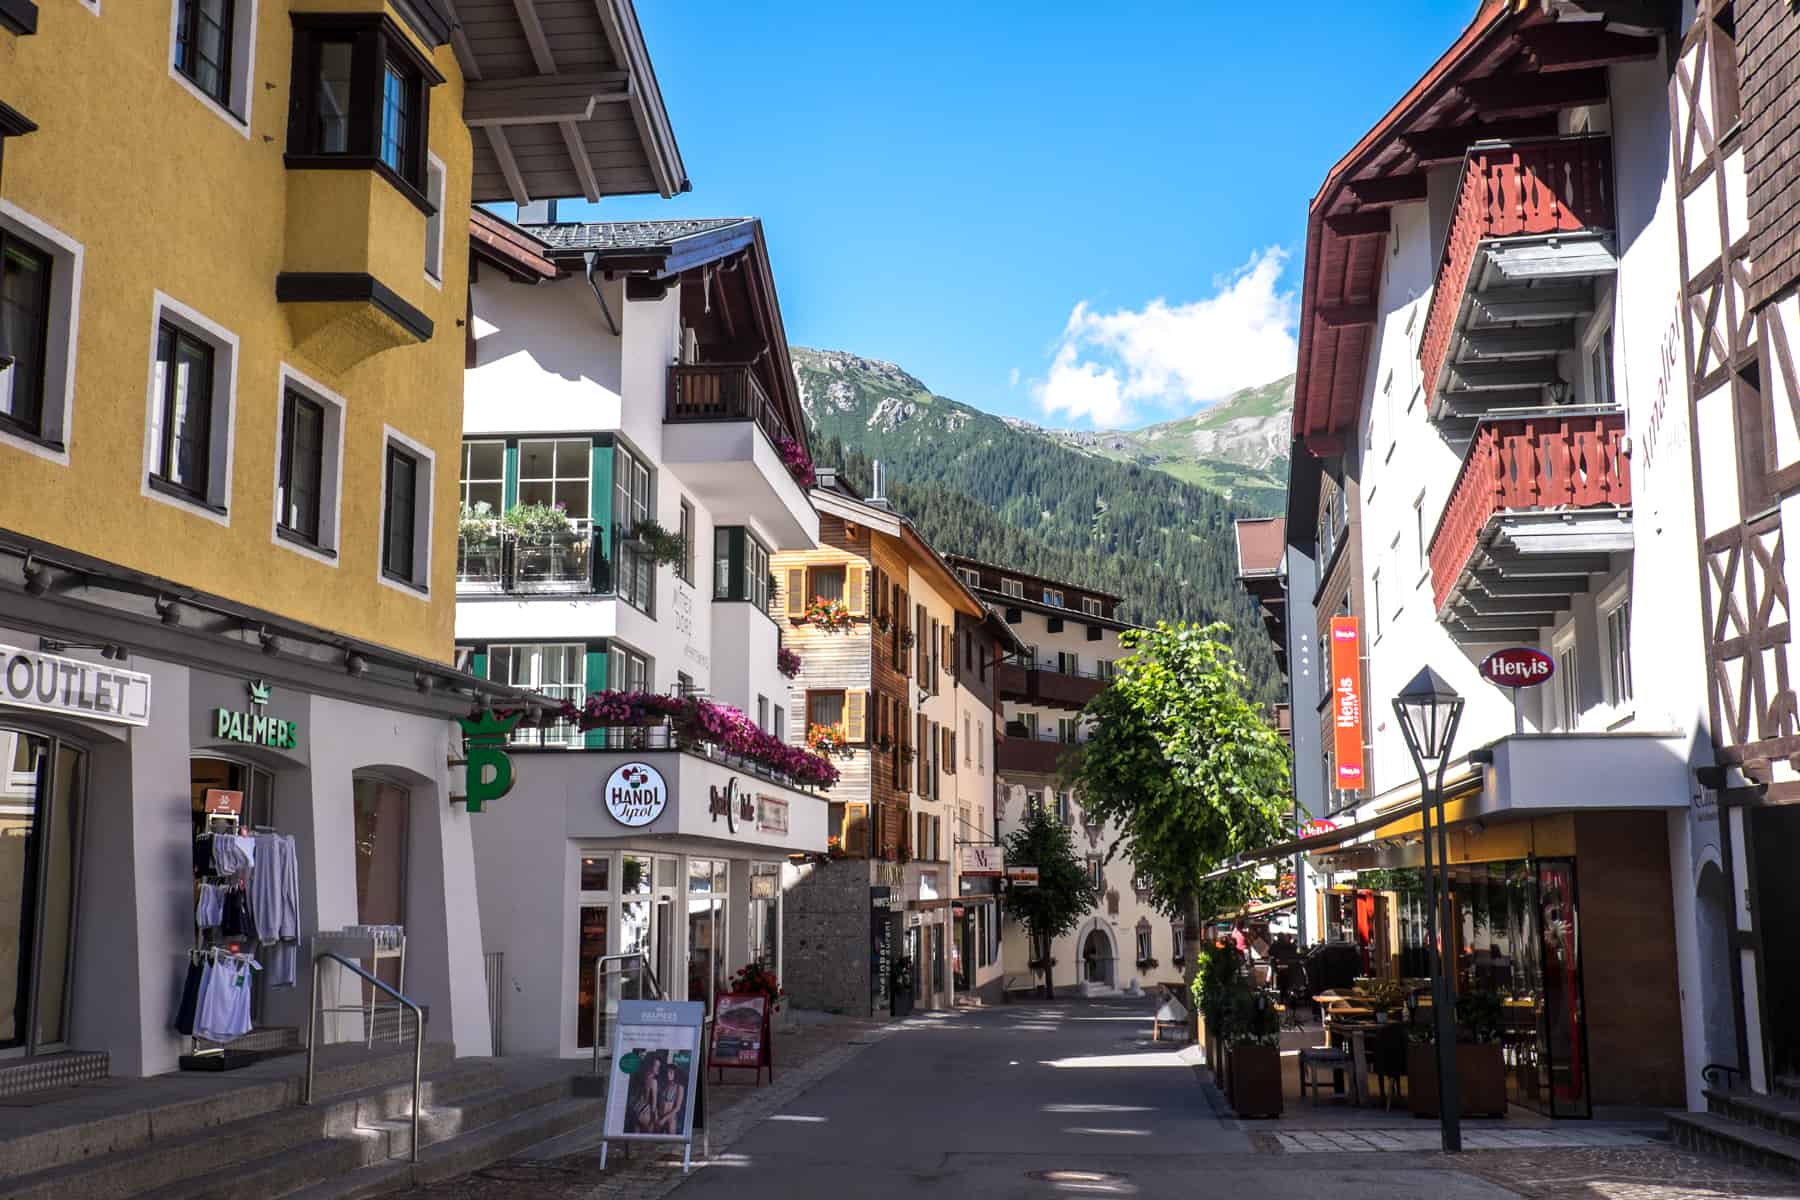 A main street full of shops and hotels in the village of St Anton Tirol Austria